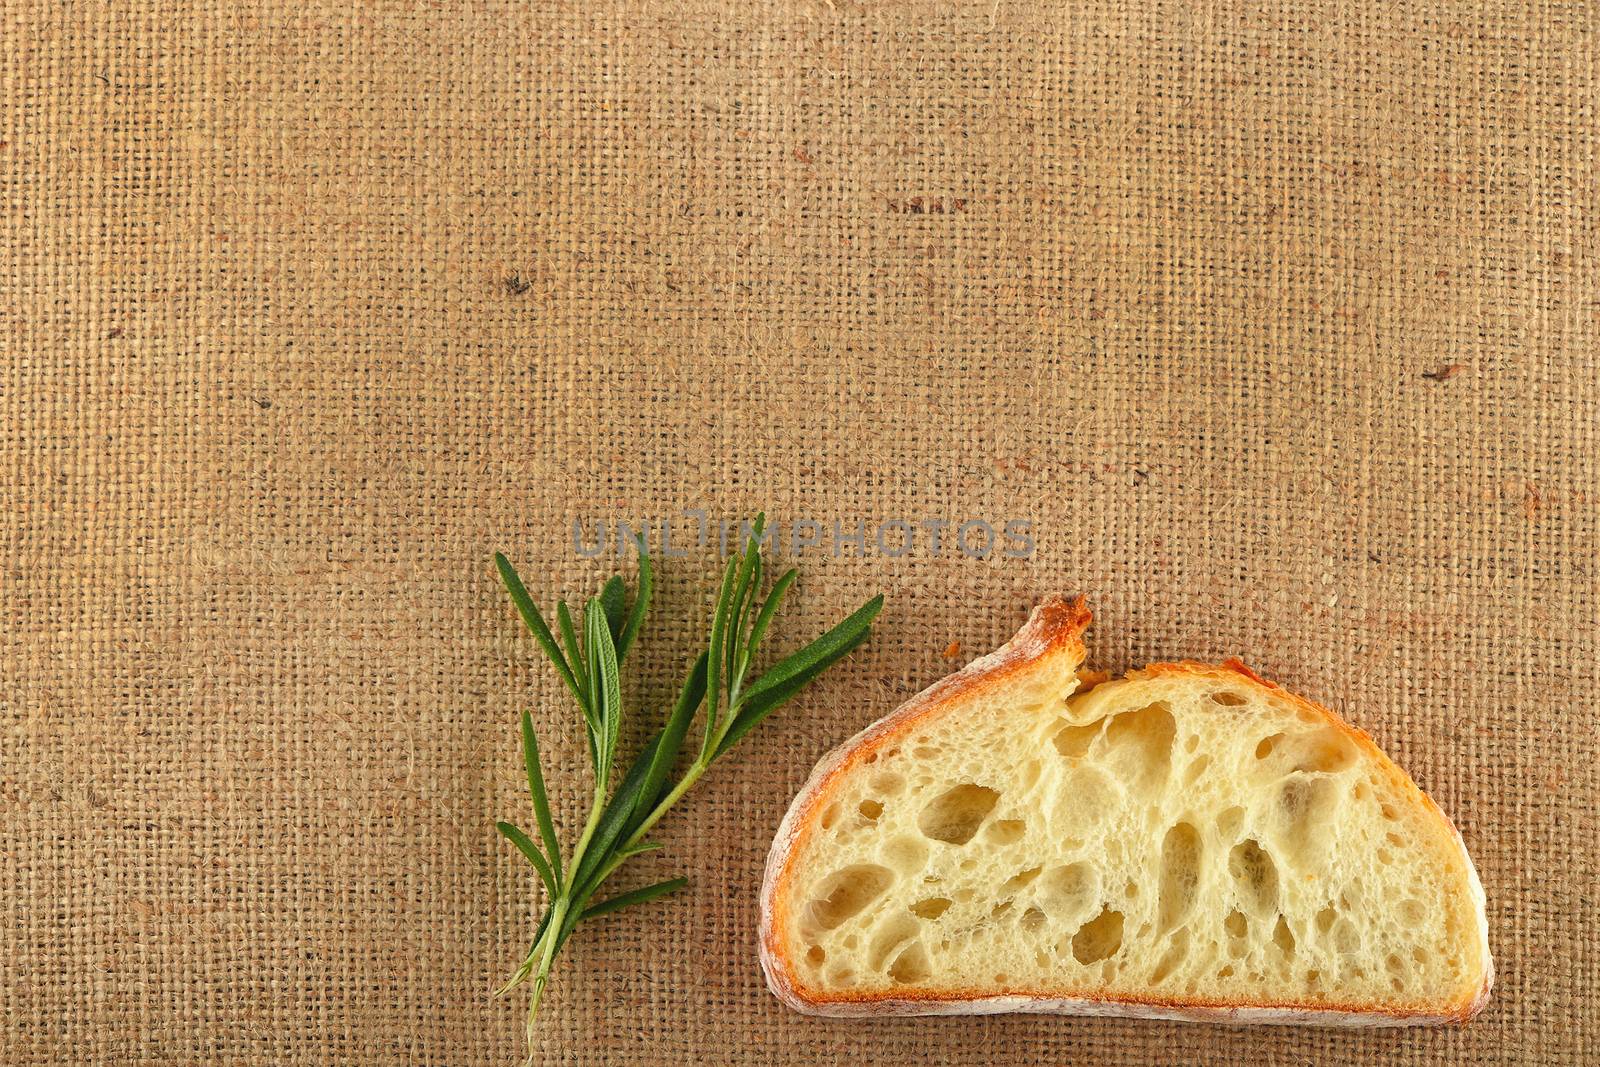 Canvas with rosemary leaves and slice of wheat bread by BreakingTheWalls